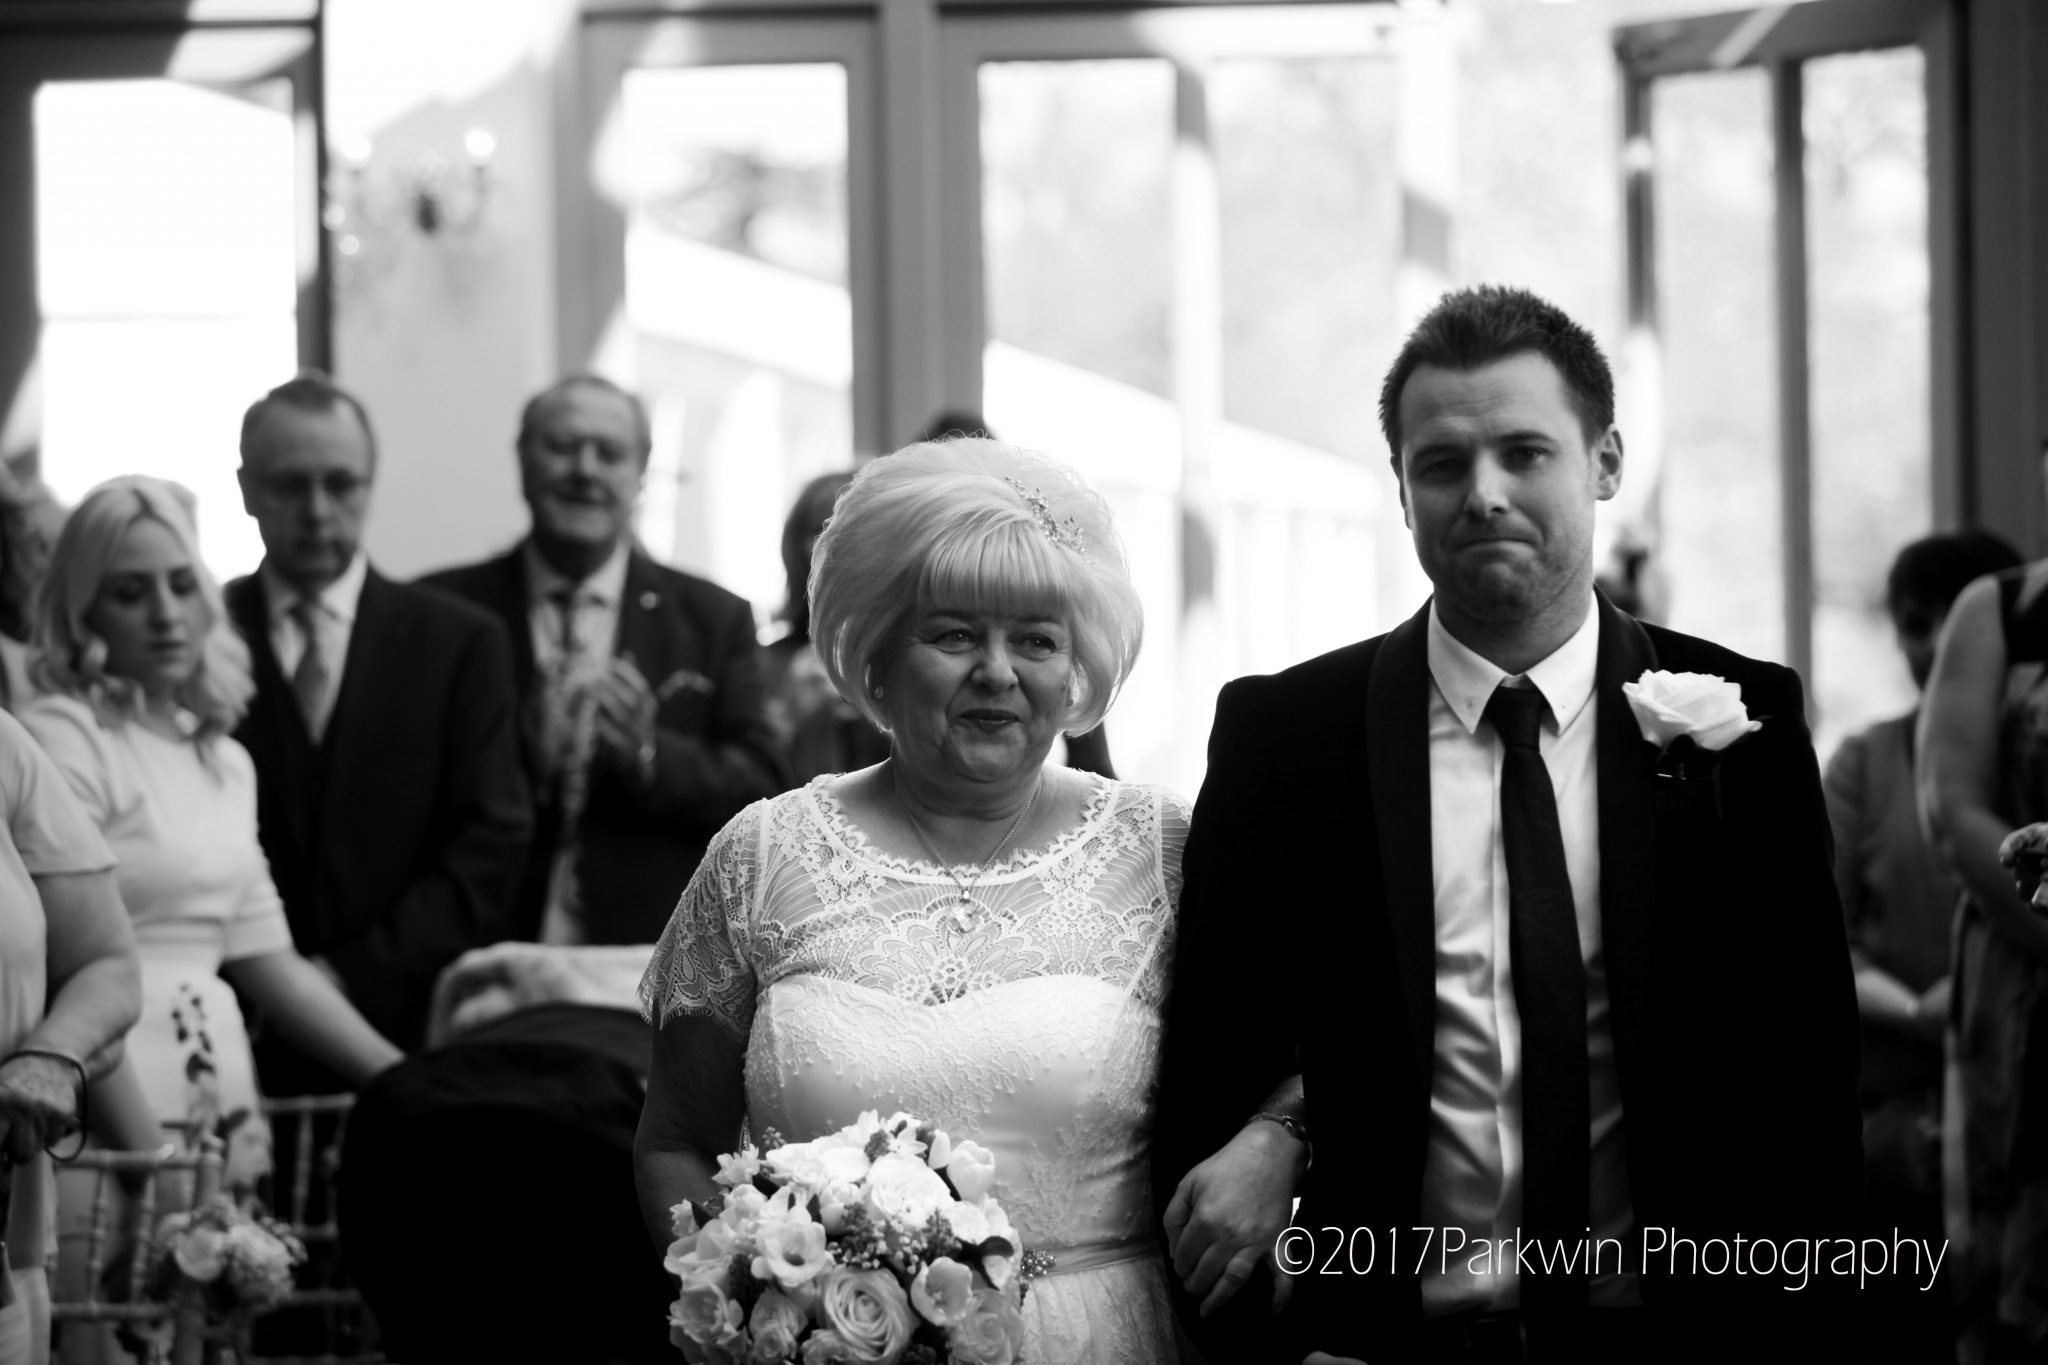 proud son with Mum at Wedding